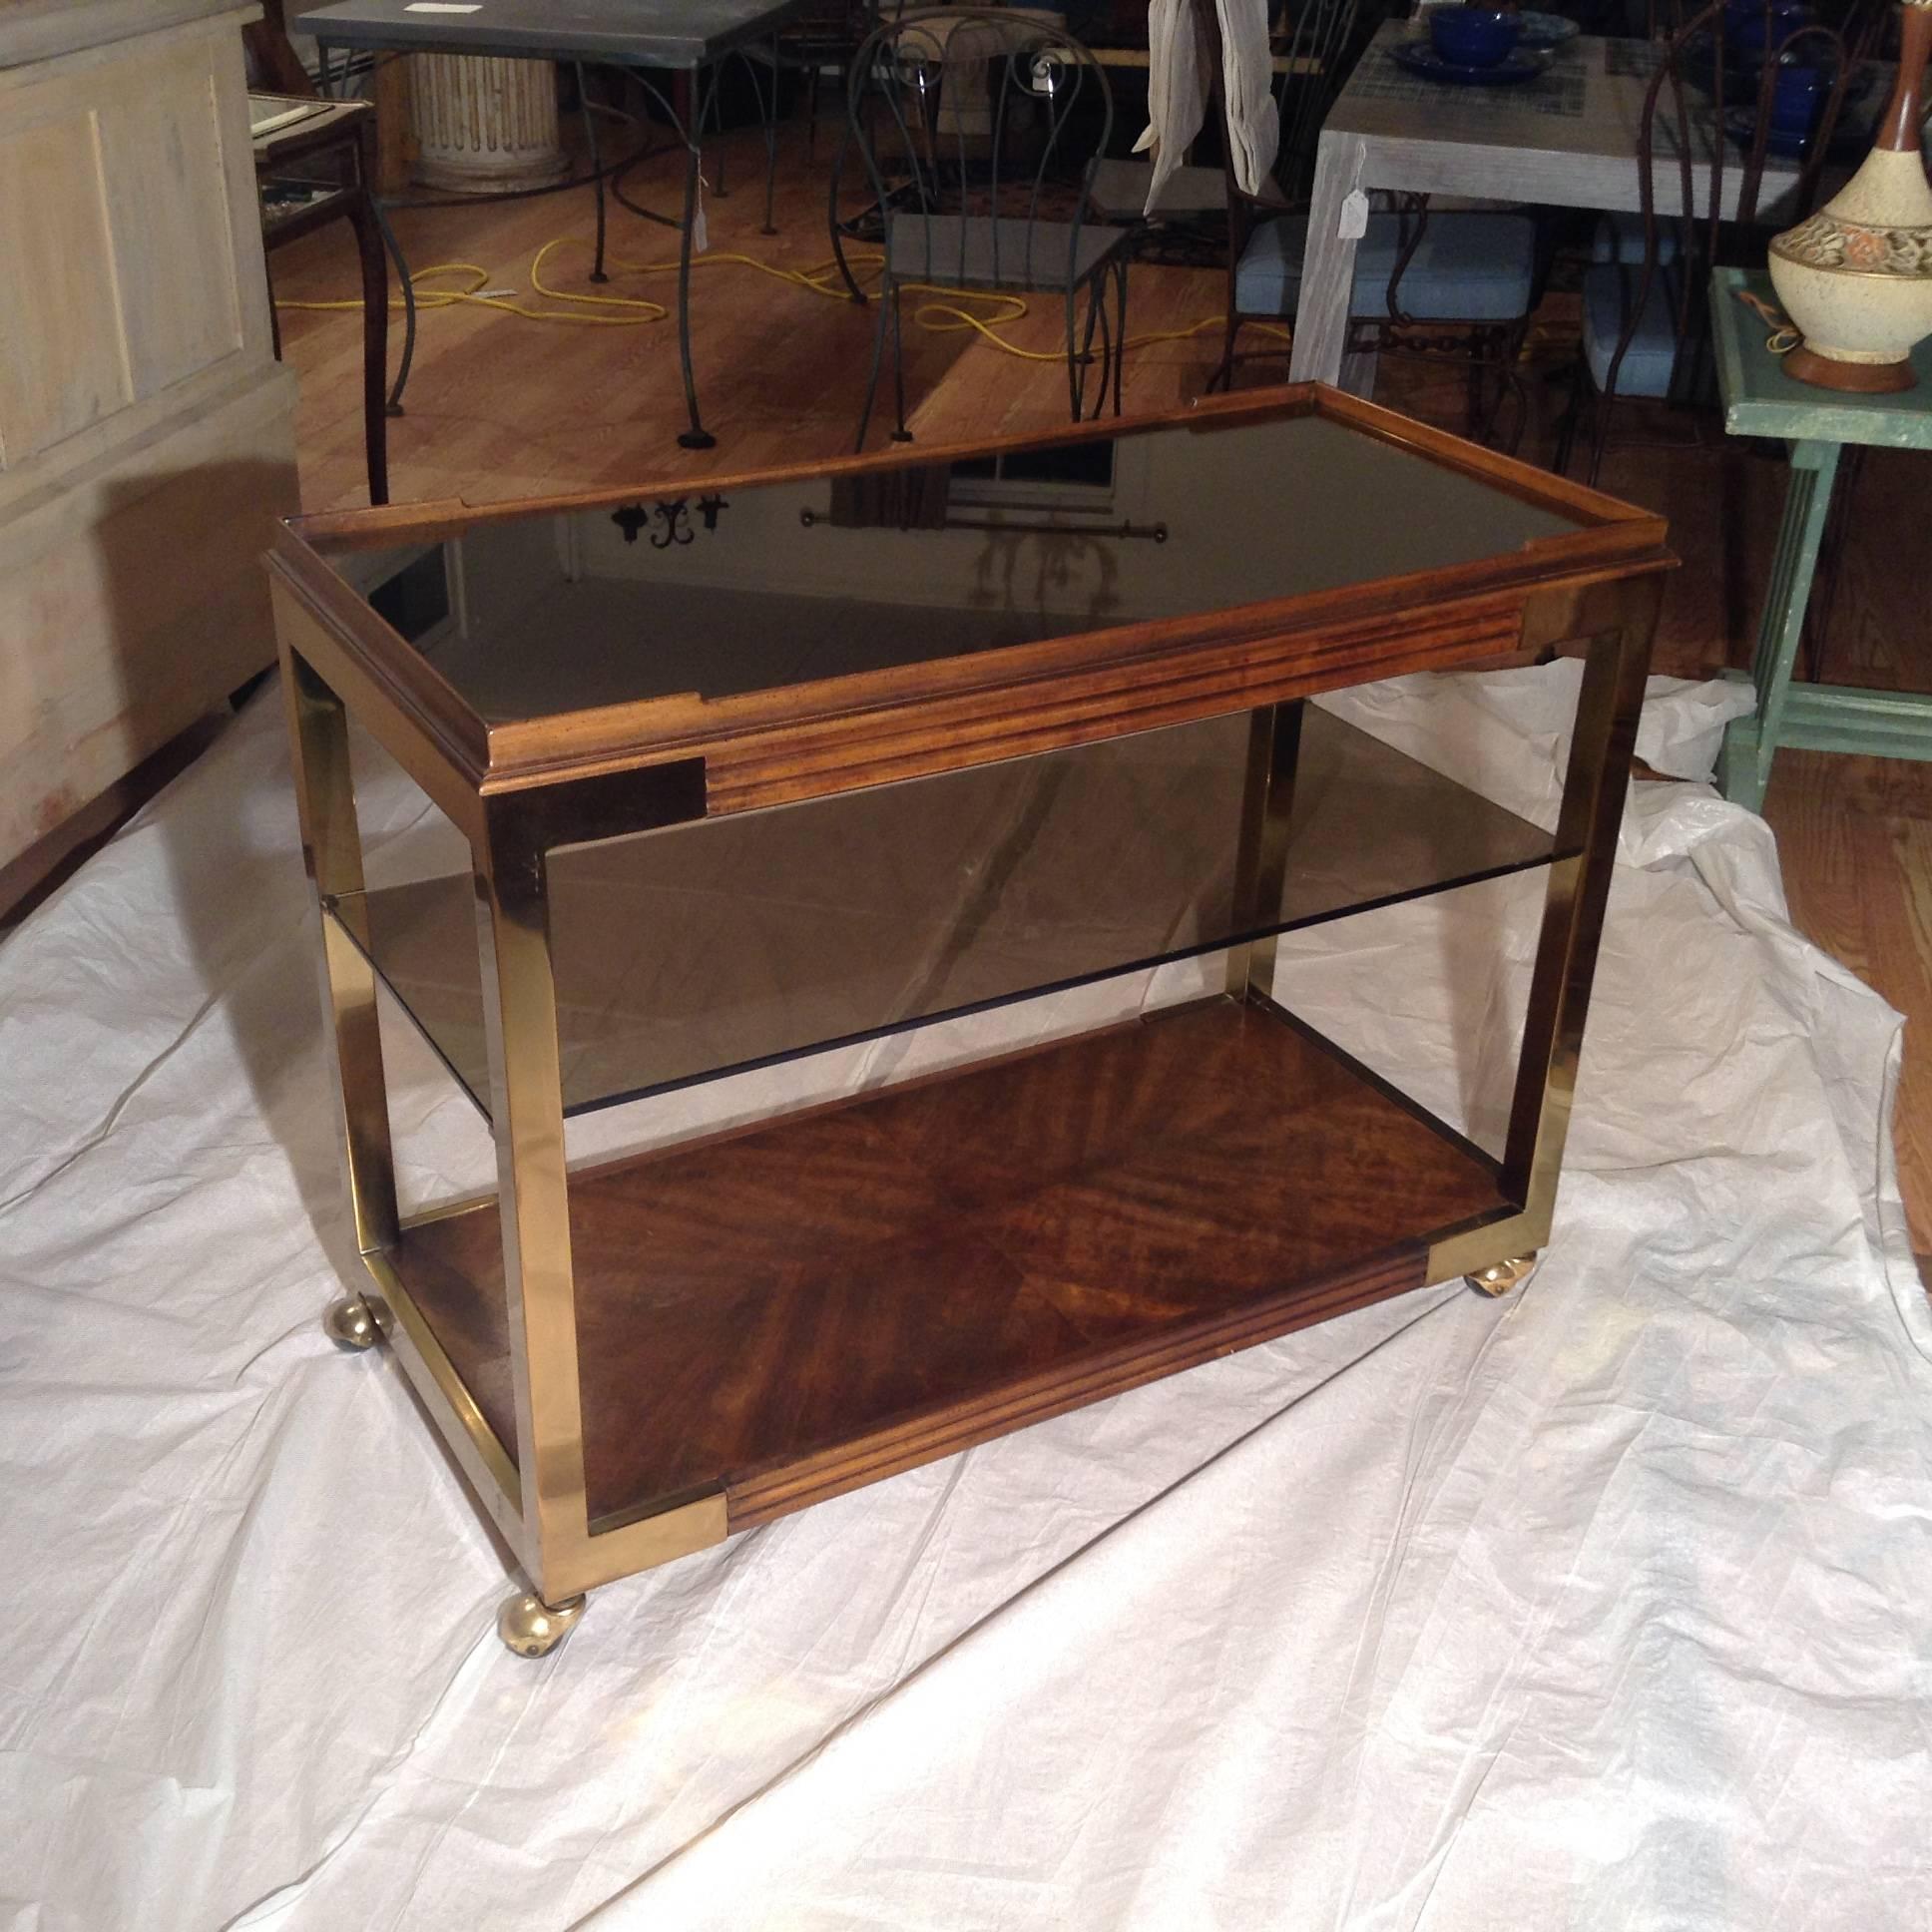 Drexel Heritage bar cart with caster wheels. Brass trim on wood. Smoke glass shelf and mirror top.
 